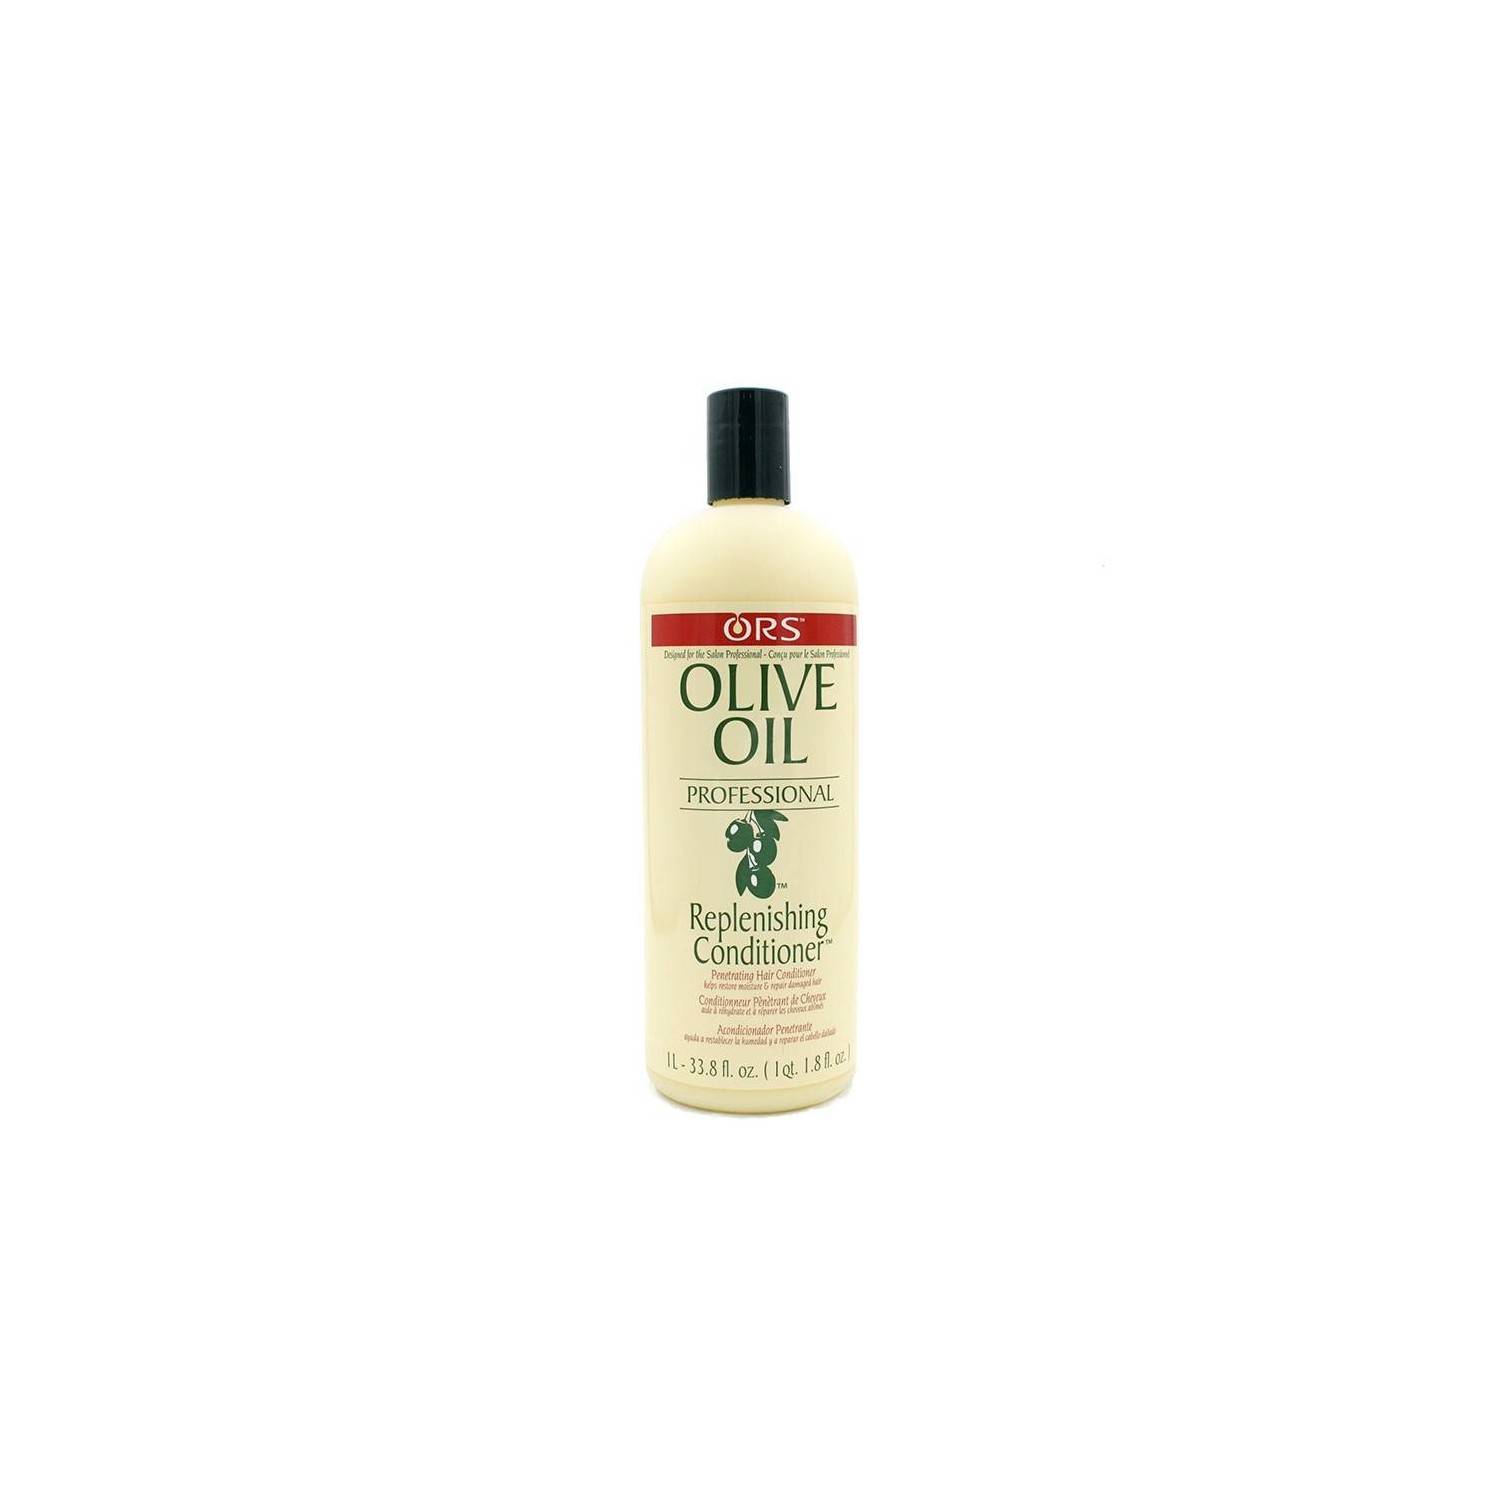 Ors Olive Oil Replenishing Conditioner 1l